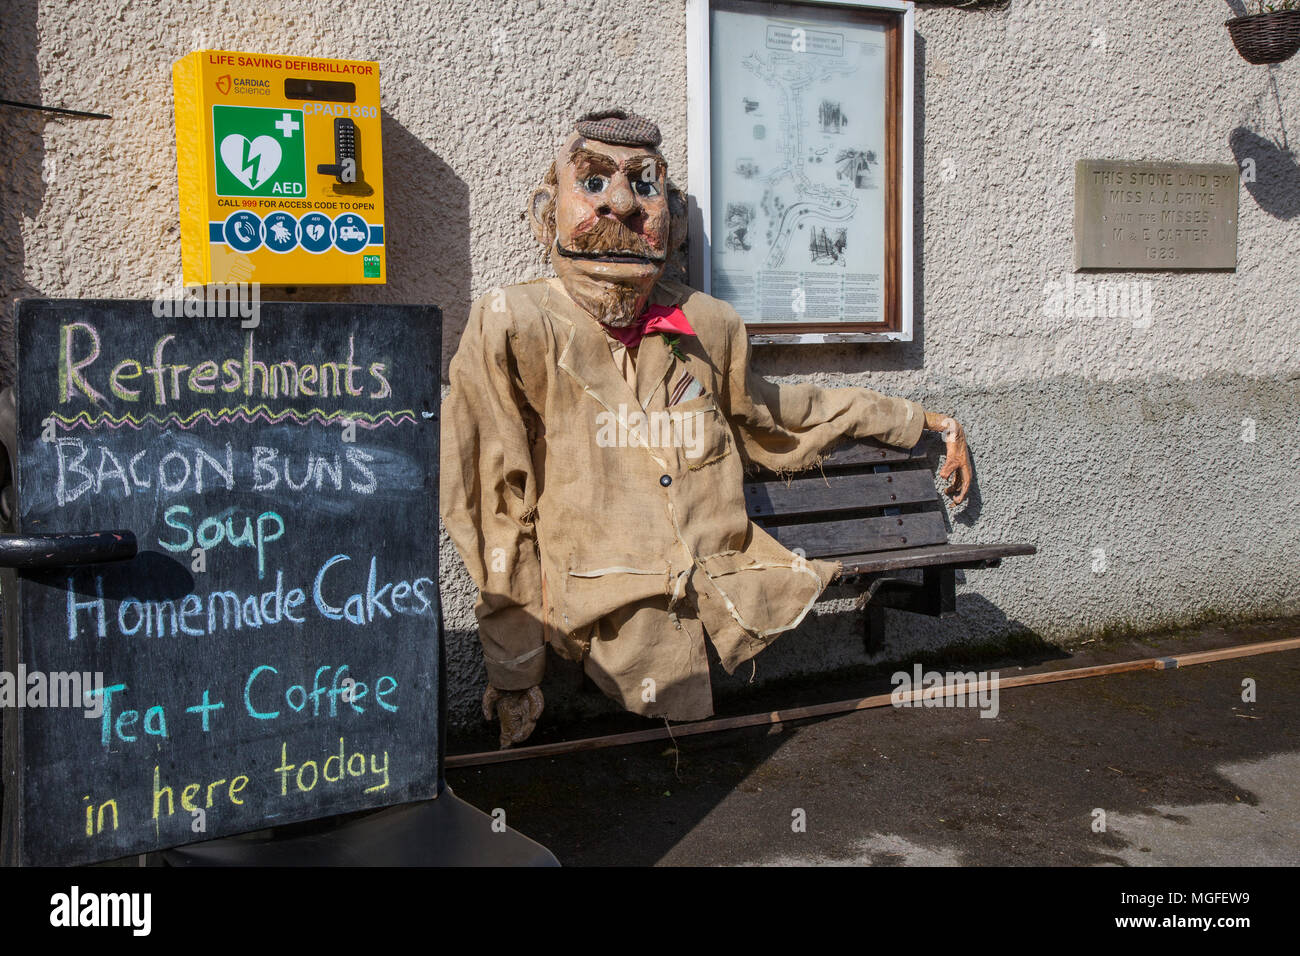 Old man scarecrow seated on seat, next to emergency defibrillator box in Wray, Lancaster, UK. 28/04/2018. Wray Scarecrow Festival and village cafe.The villagers  are back again to creating some weird, wacky and wonderful scarecrow creations to surprise and delight visitor. Each year visitors wander around Wray village, discovering the host of scarecrows that have popped up in village gardens. Credit: MediaWorldImages/AlamyLiveNews Stock Photo